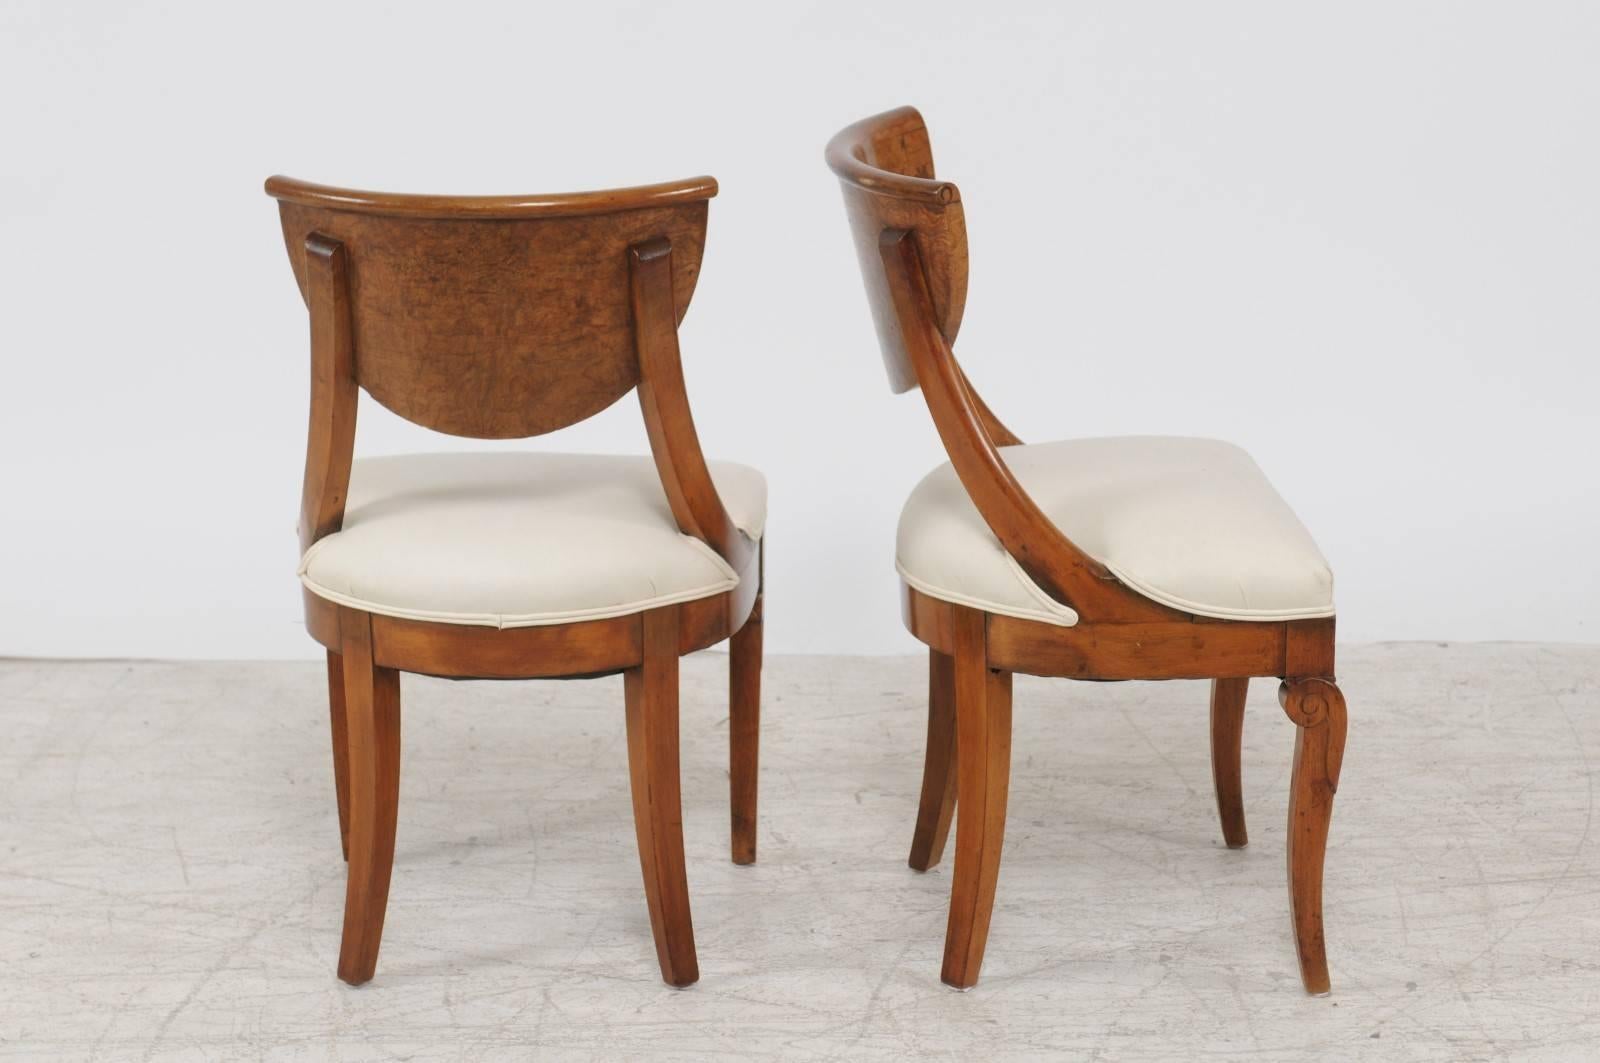 Upholstery Pair of 1840s Austrian Biedermeier Upholstered Side Chairs with Marquetry Décor